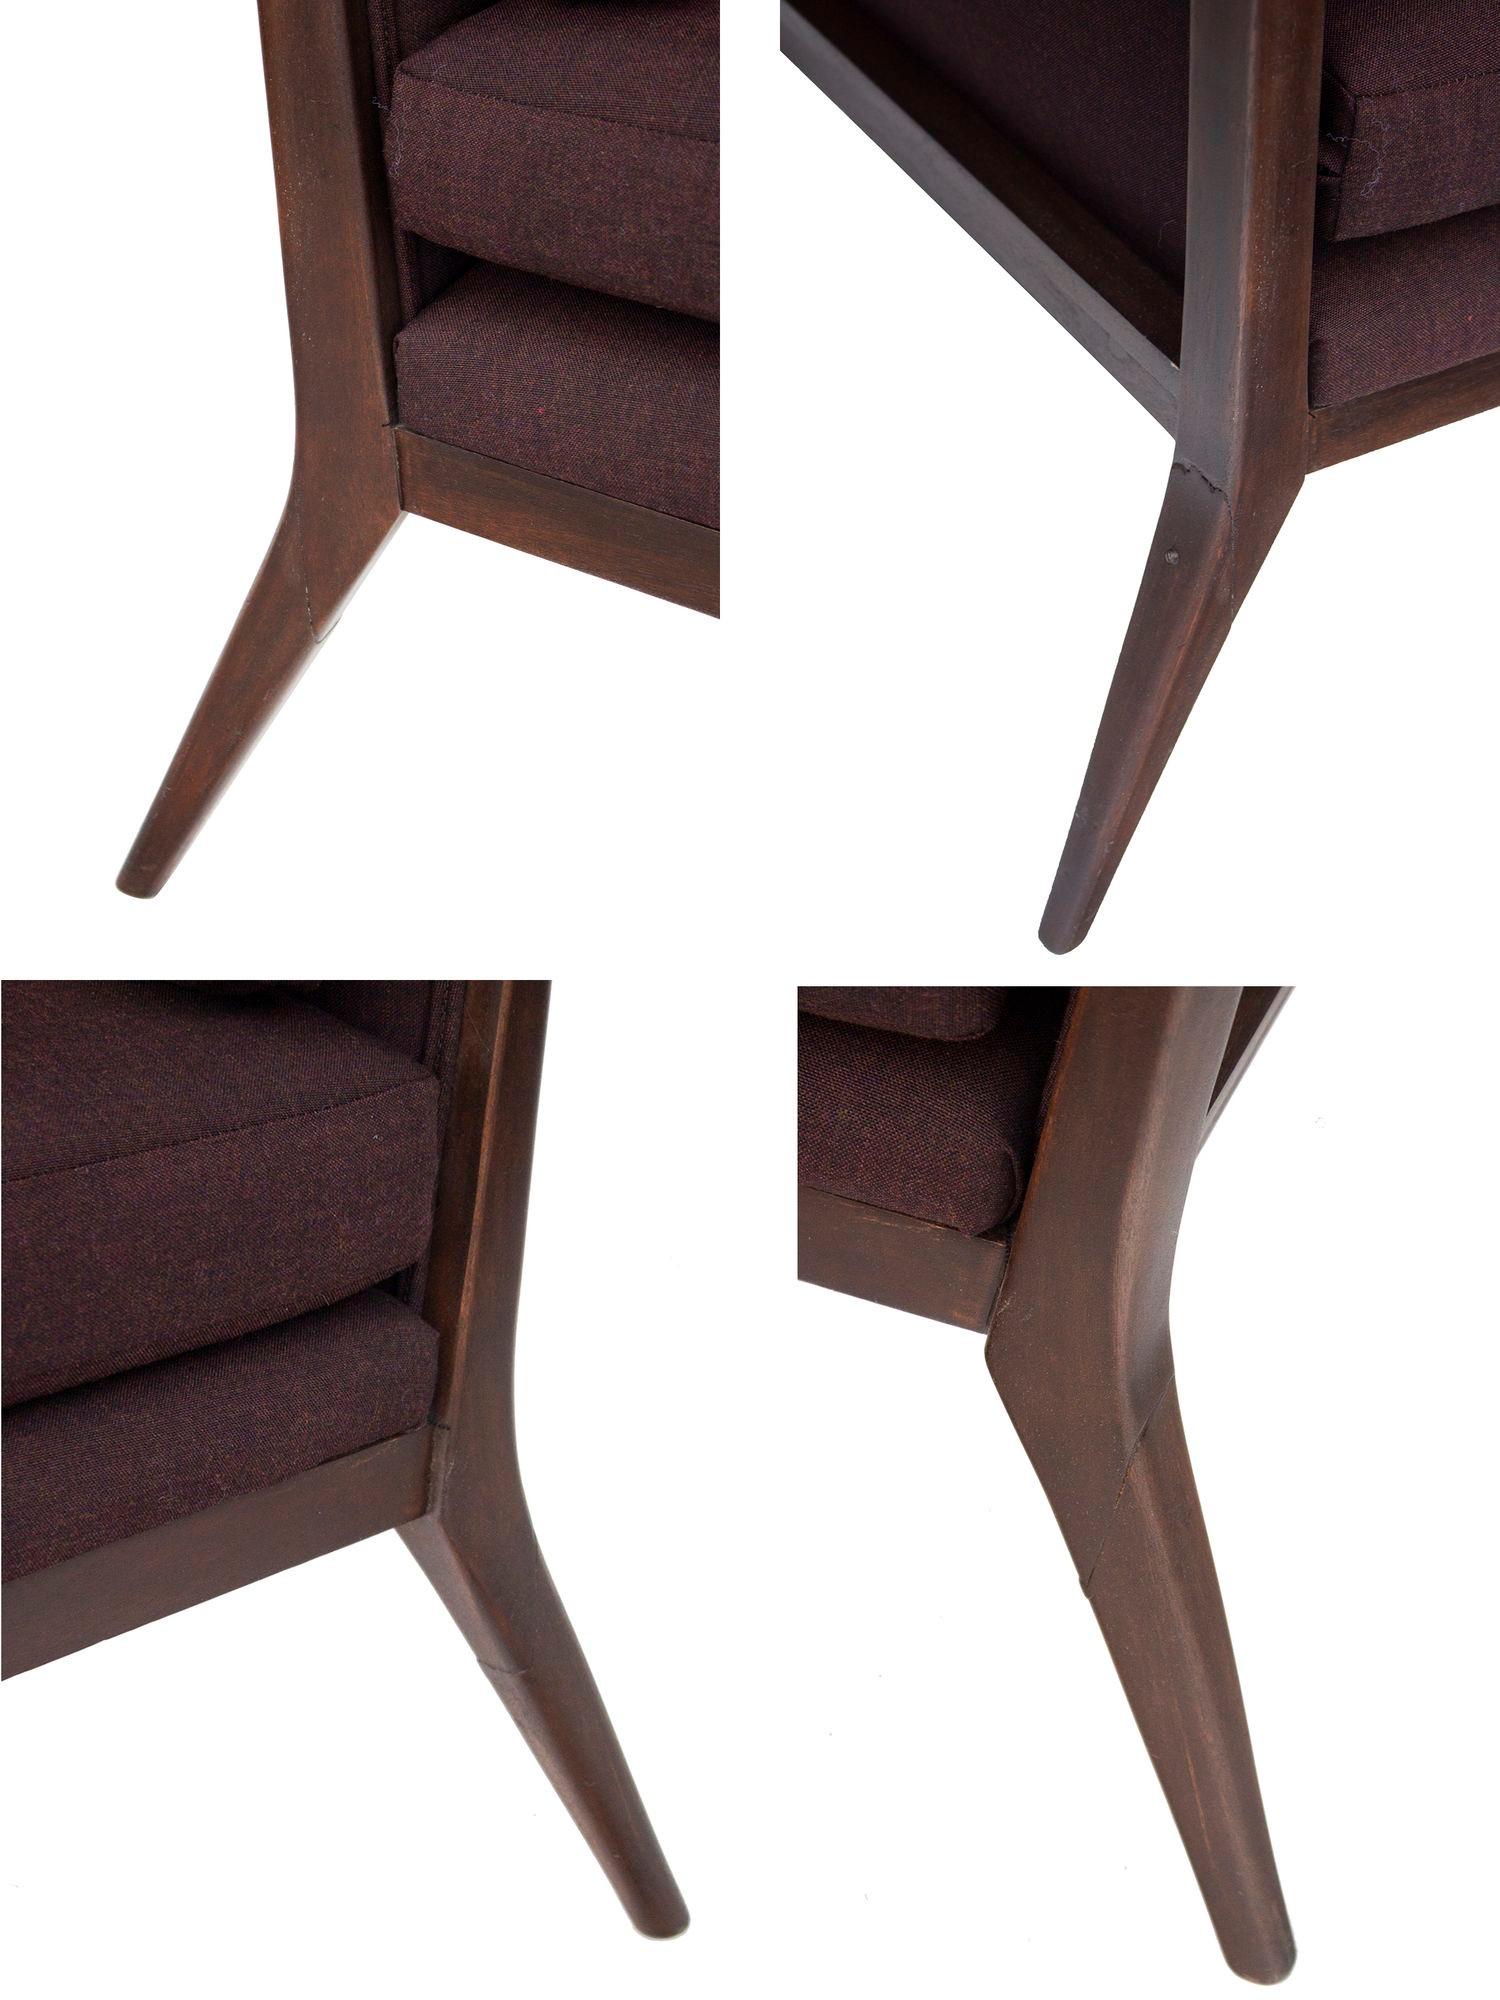 Paul McCobb for Widdicomb Walnut Armchairs, Newly upholstered For Sale 4